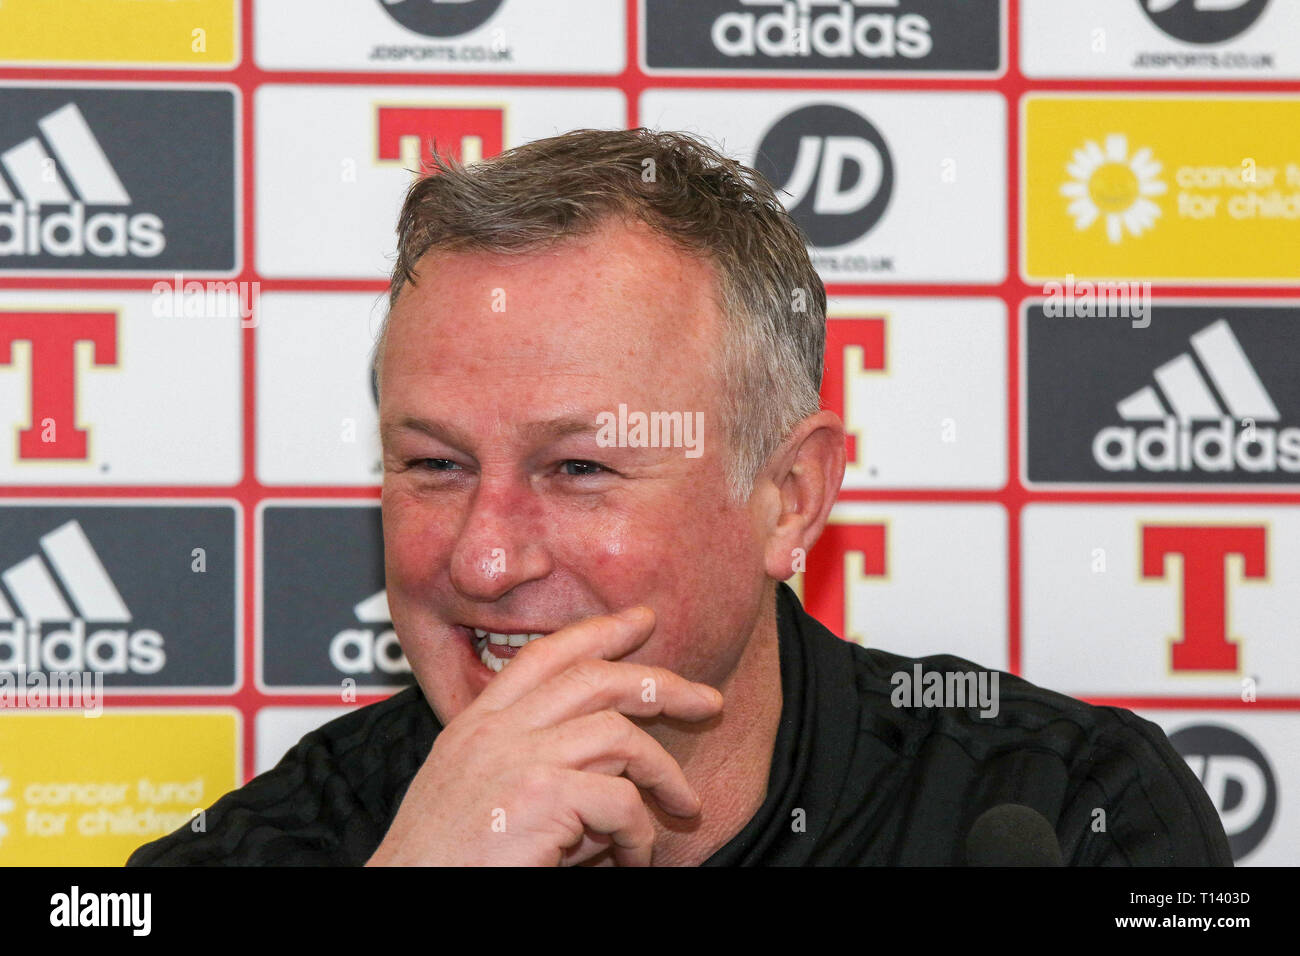 Windsor Park, Belfast, Northern, Ireland. 23rd Mar, 2019. Northern Ireland manager Michael O'Neill at today's press conference in Belfast. Northern Ireland play Belarus at Windsor Park tomorrow evening in their second UEFA EURO 2020 Qualifying game. On Friday night Northern Ireland defeated Estonia 2-0 in their first qualifying game. Credit: David Hunter/Alamy Live News Stock Photo